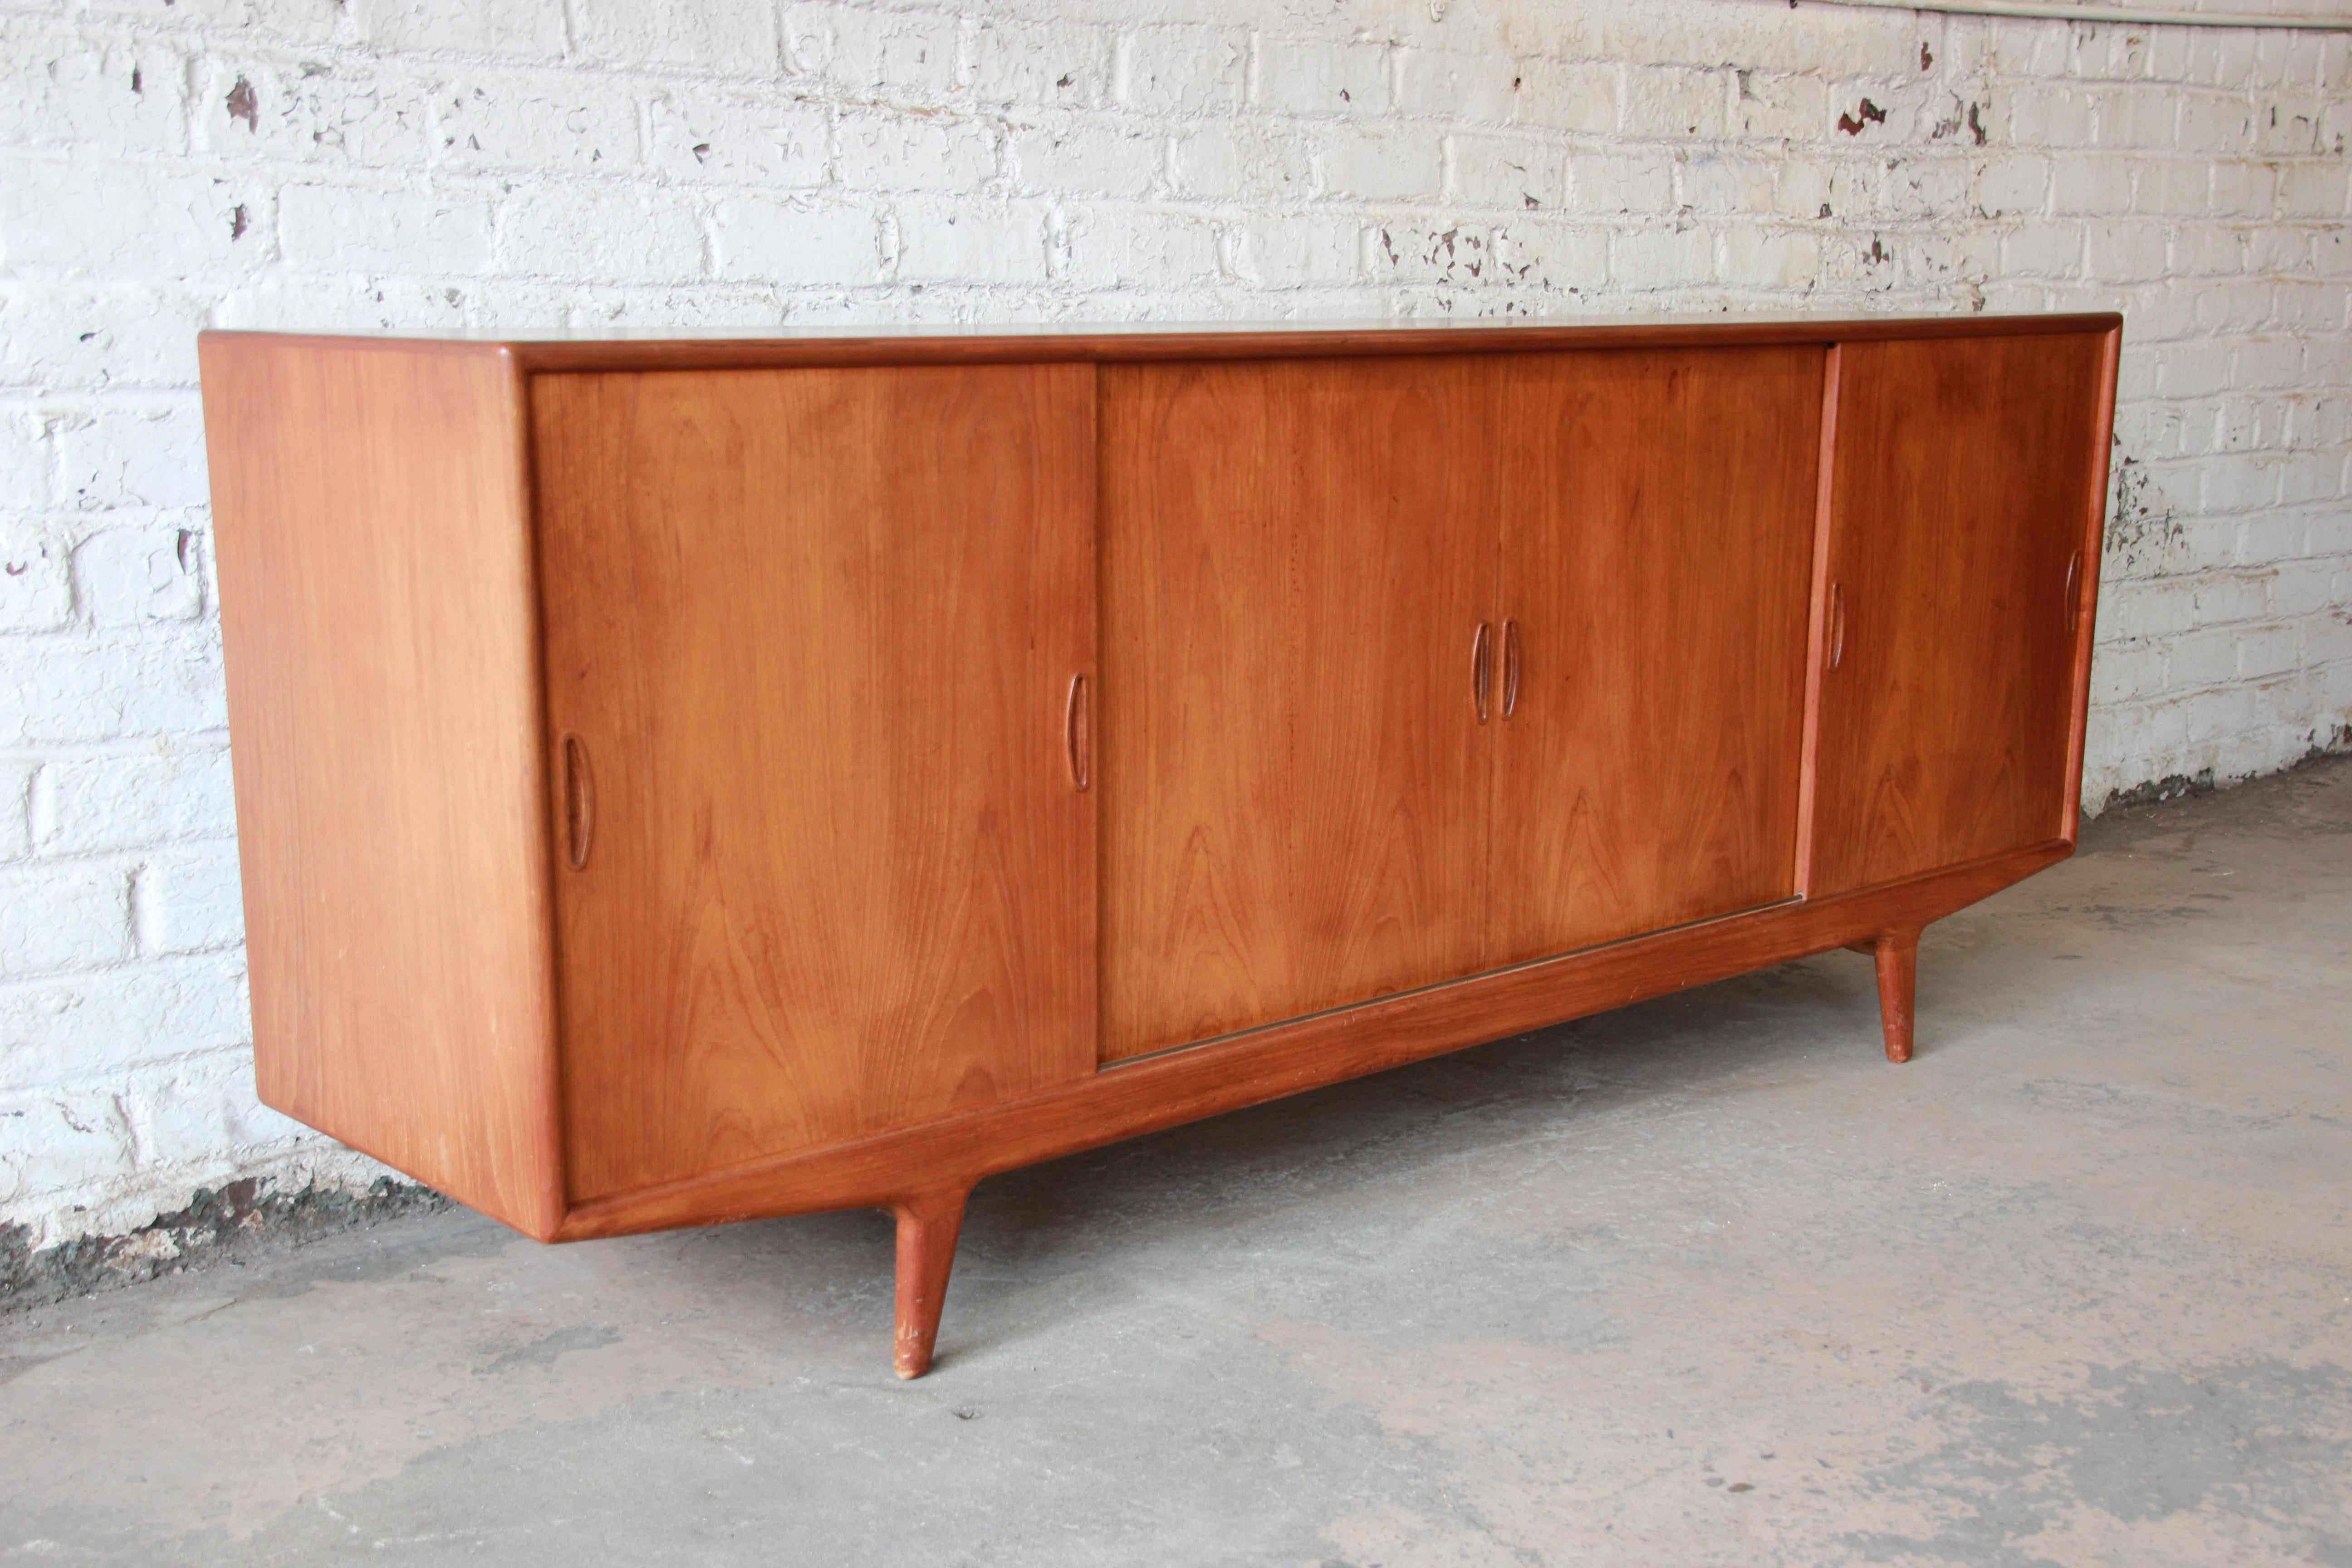 Offering an exceptional Mid-Century Danish Modern teak sideboard or credenza attributed to Arne Vodder. The credenza features stunning teakwood grain and unique splayed legs. It offers ample room for storage, with adjustable shelving on the left